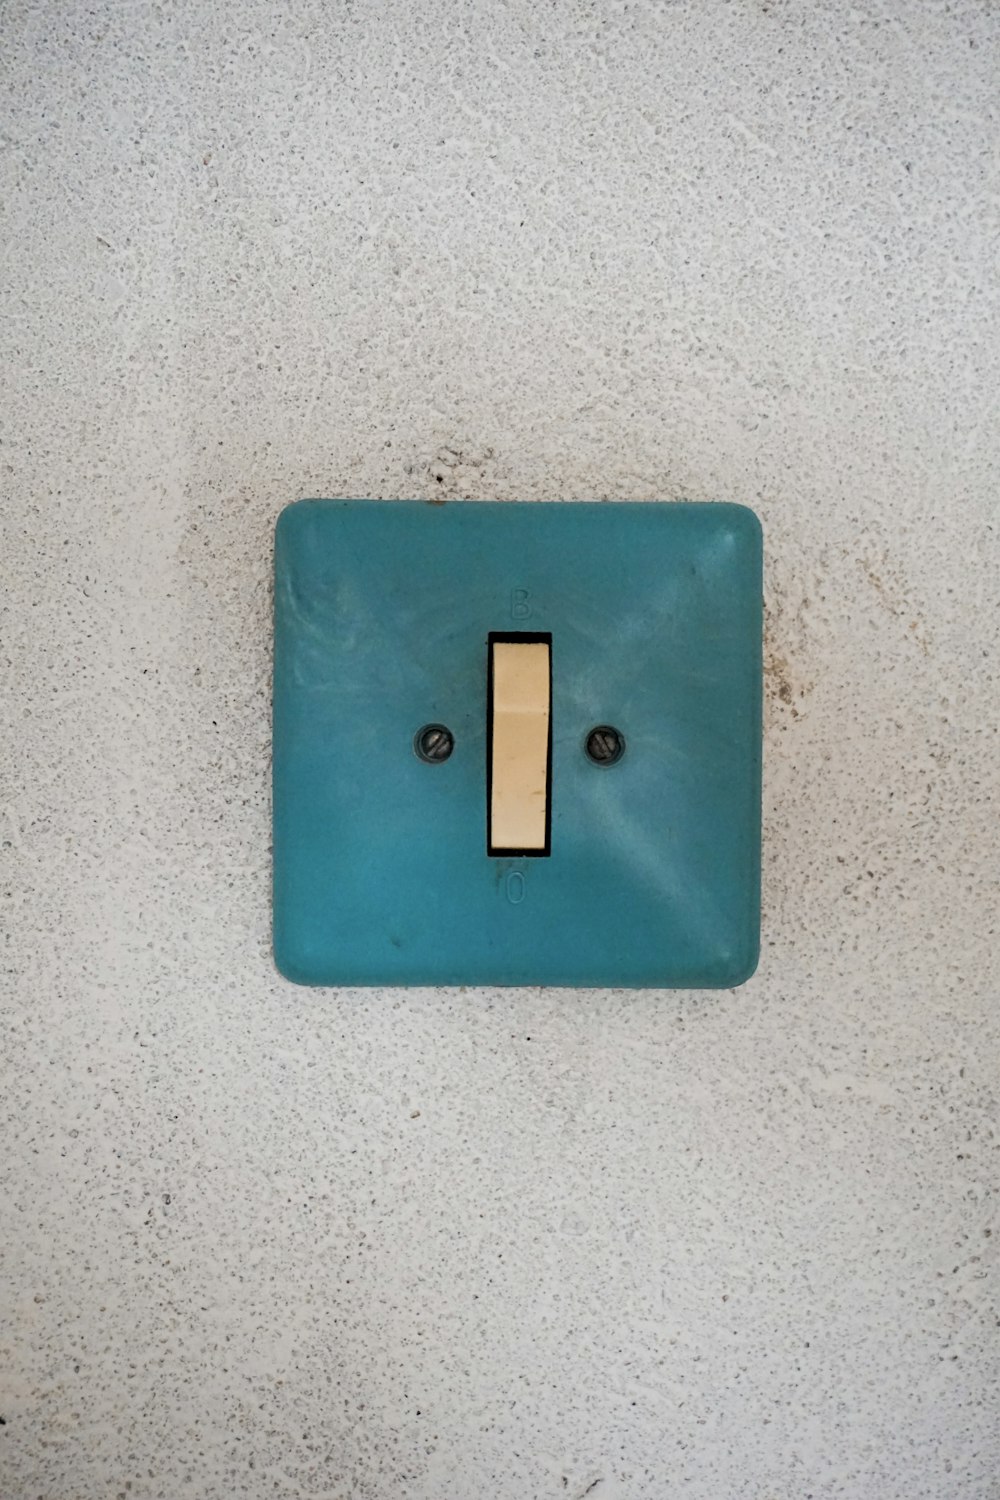 a blue light switch on a white wall